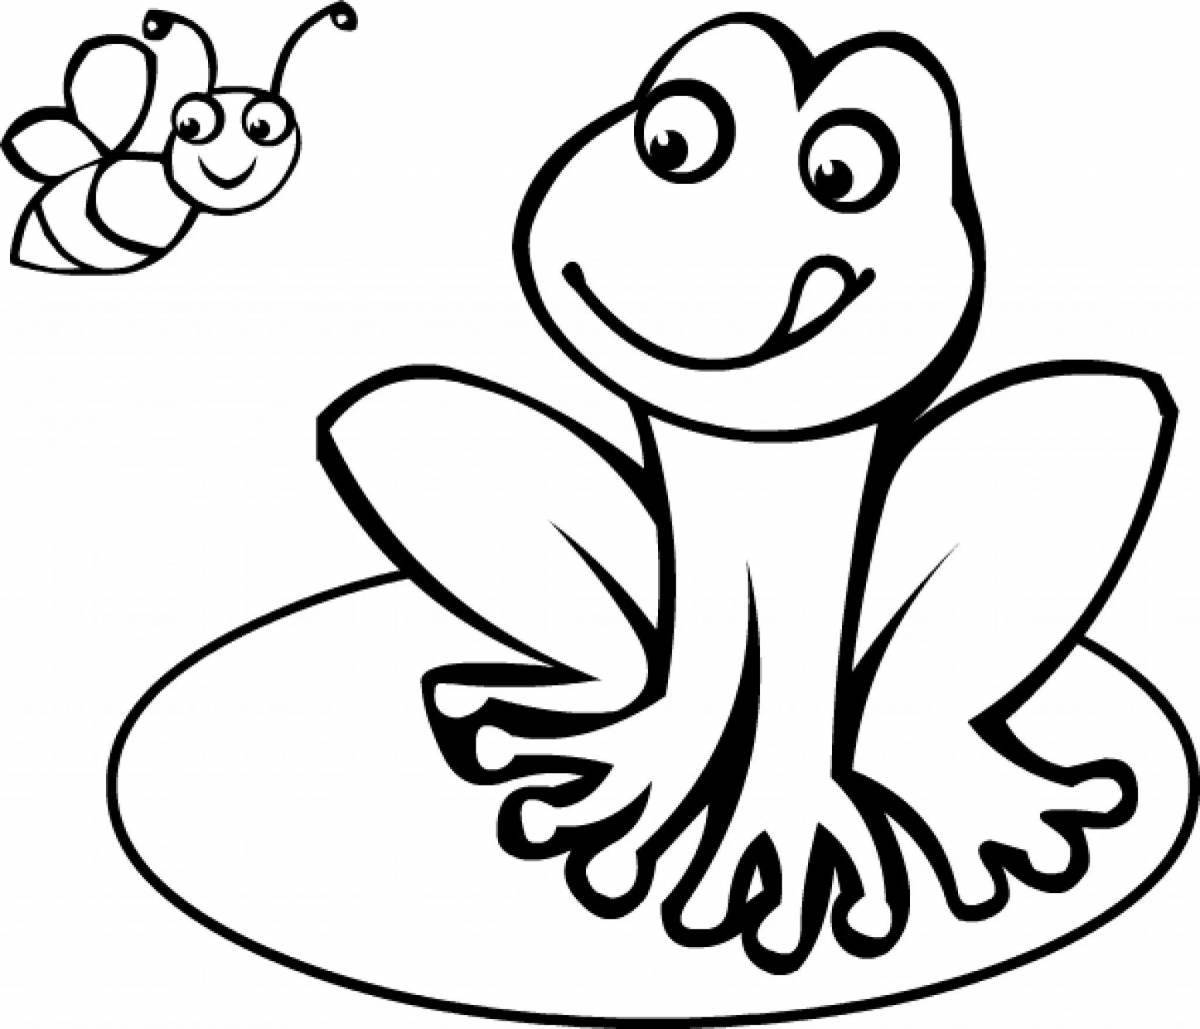 Coloring book animated frog traveler